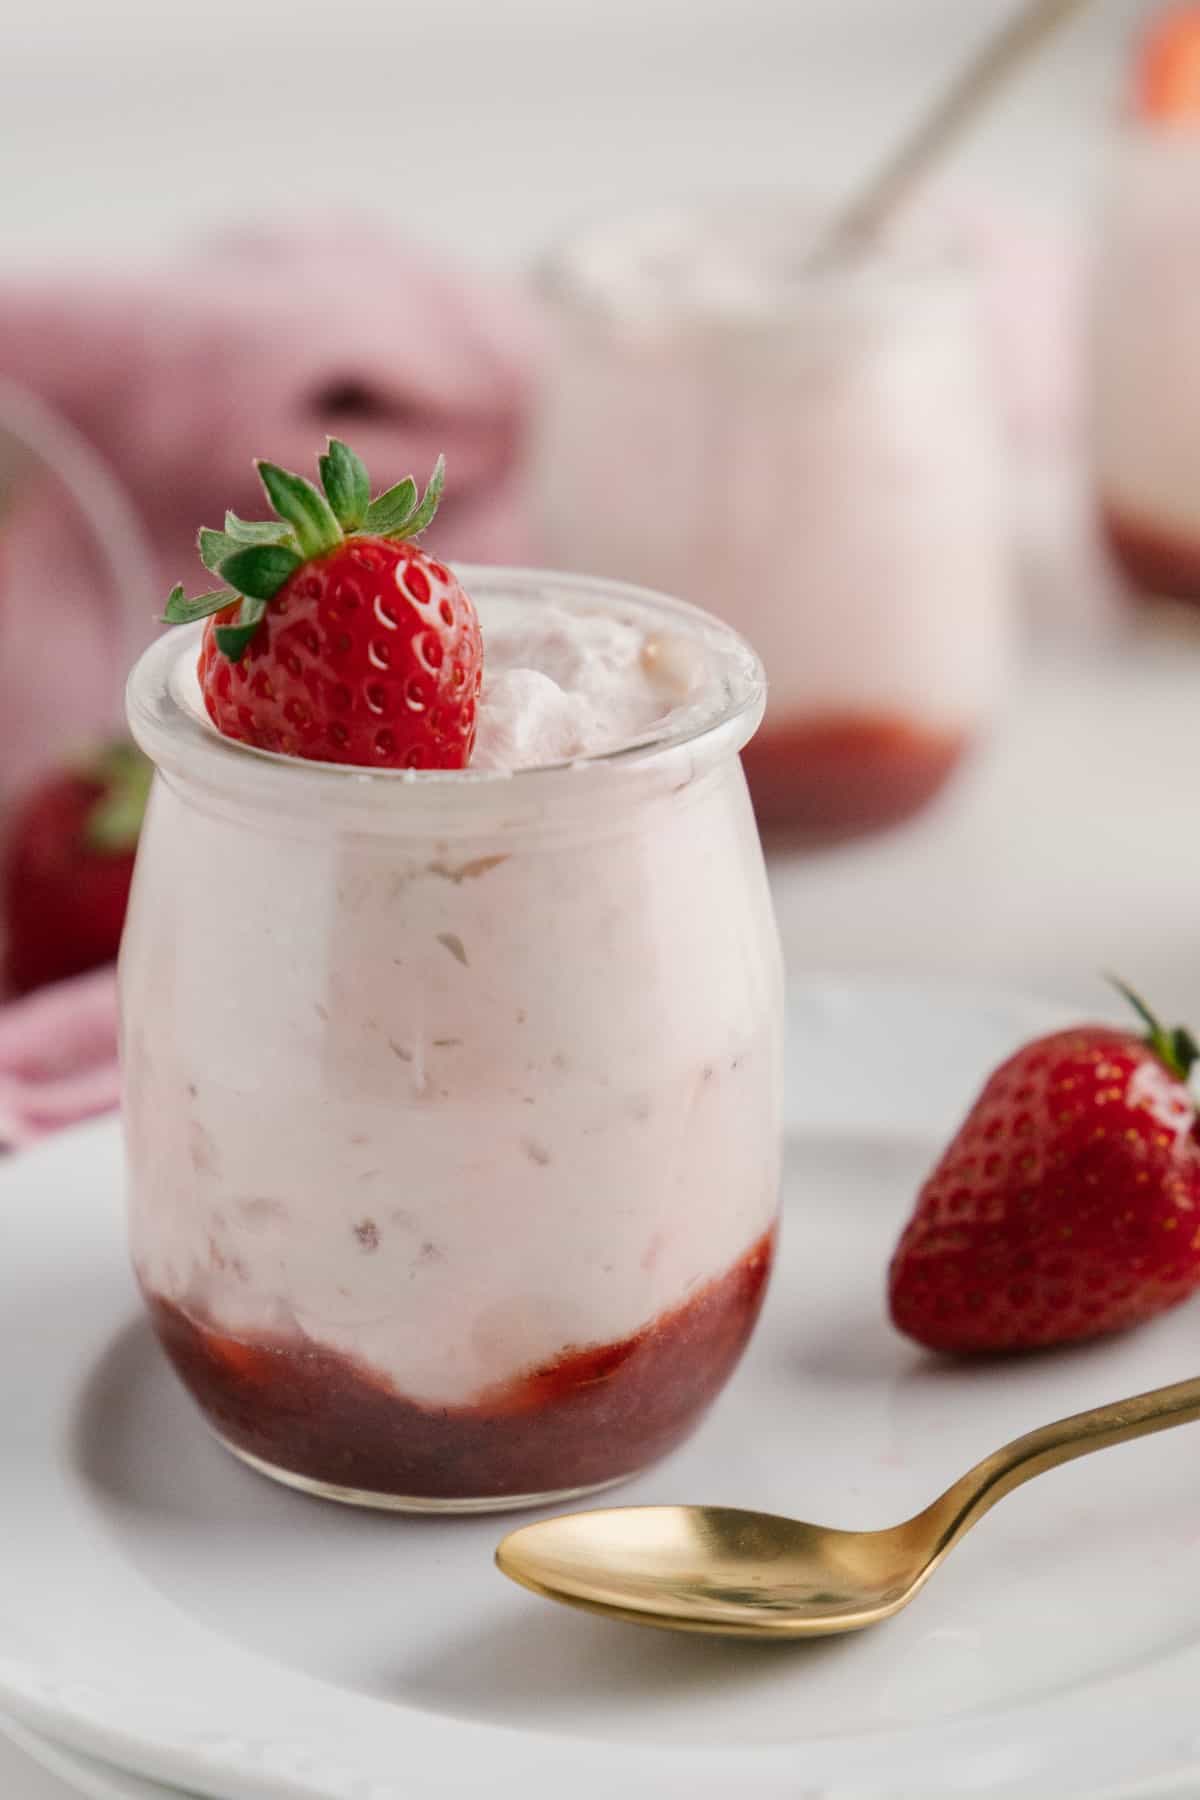 Closeup of a jar of strawberry mousse